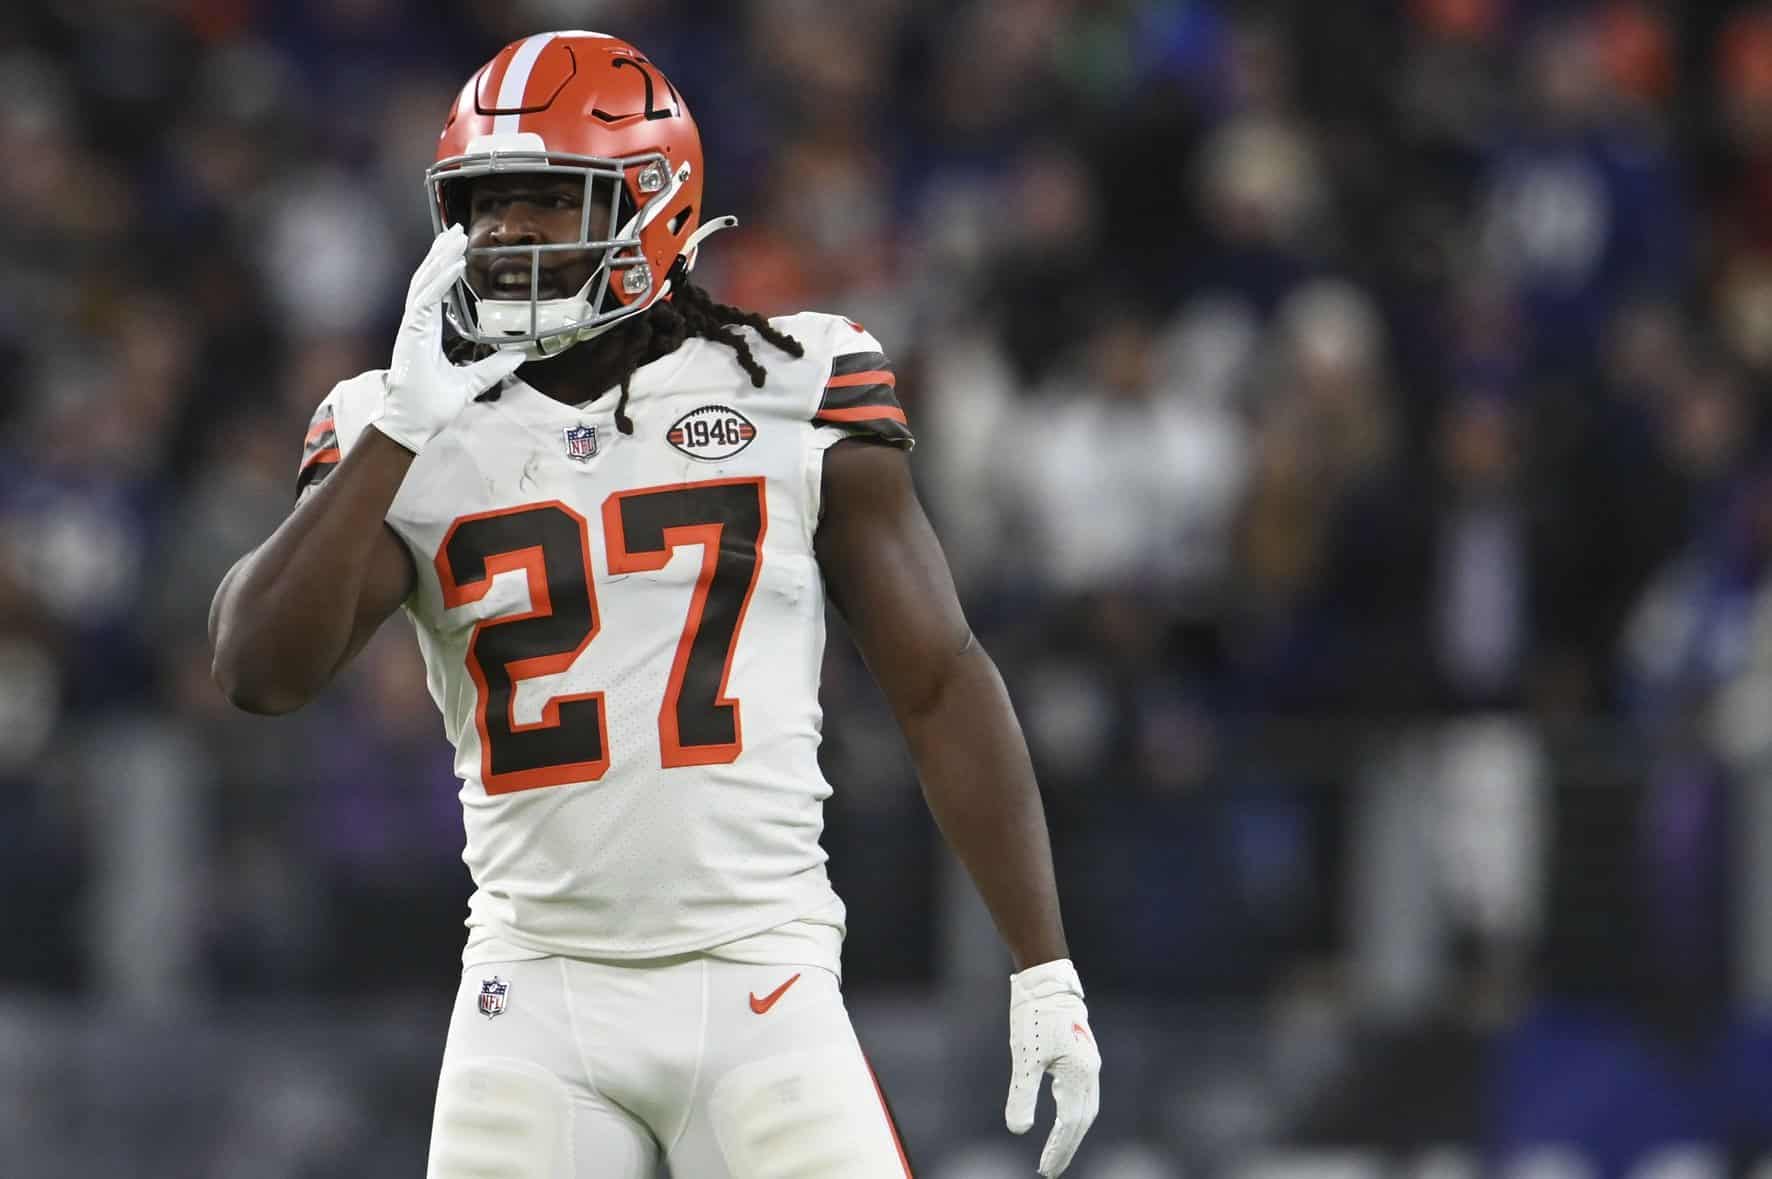 Is Kareem Hunt playing today vs. the Packers? Latest injury update